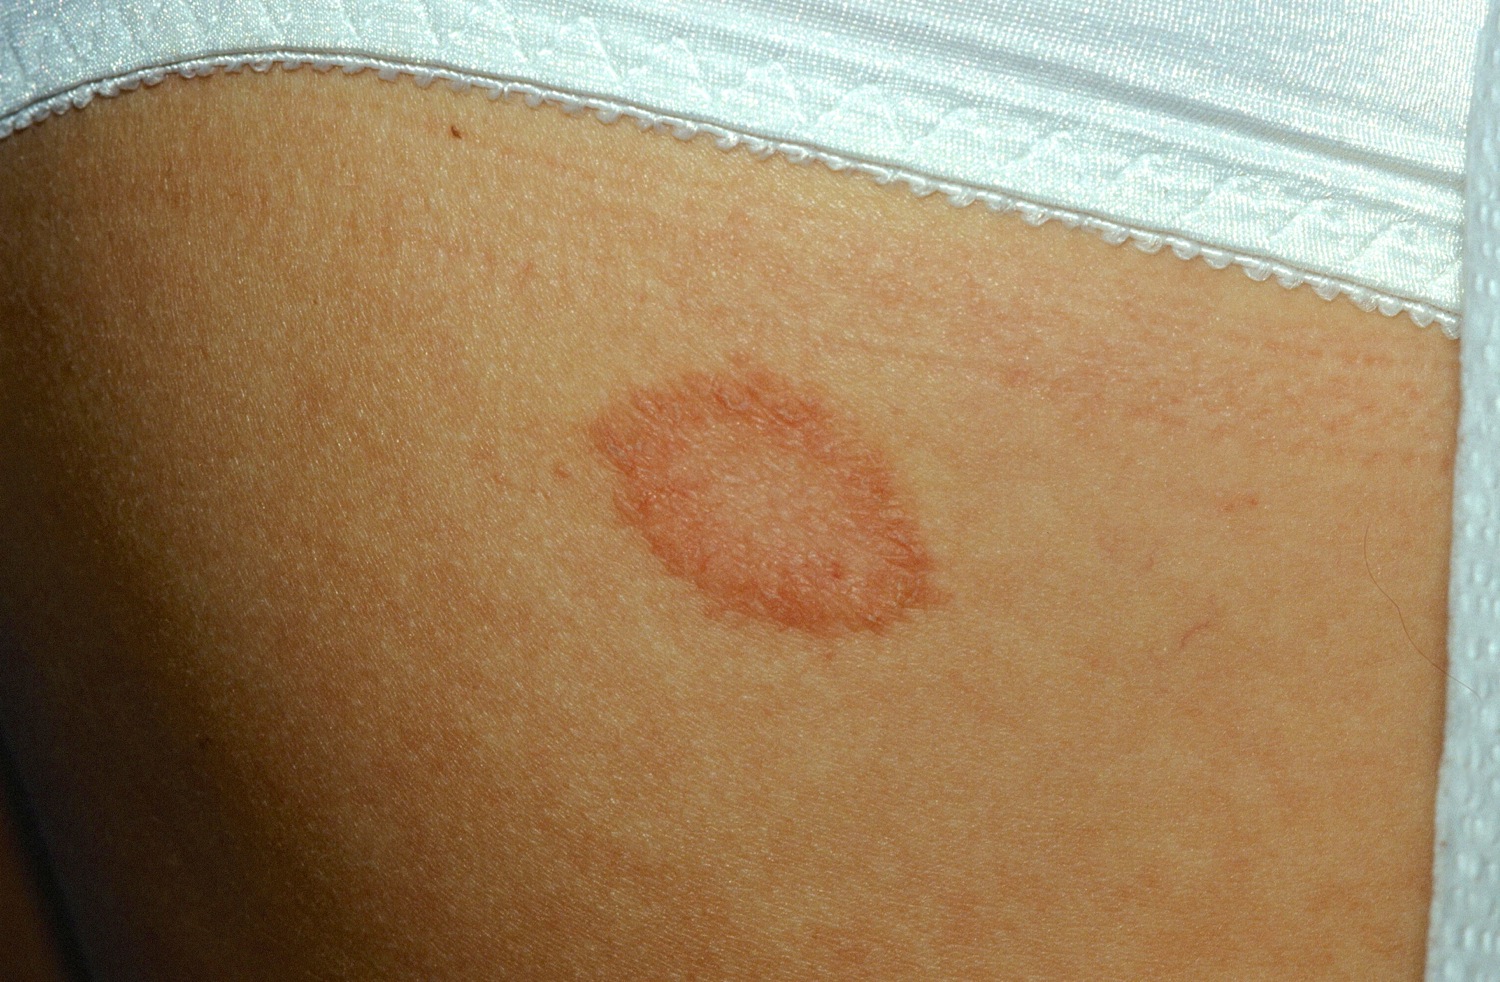 pityriasis-rosea-causes-rash-herald-patch-stages-sexiz-pix